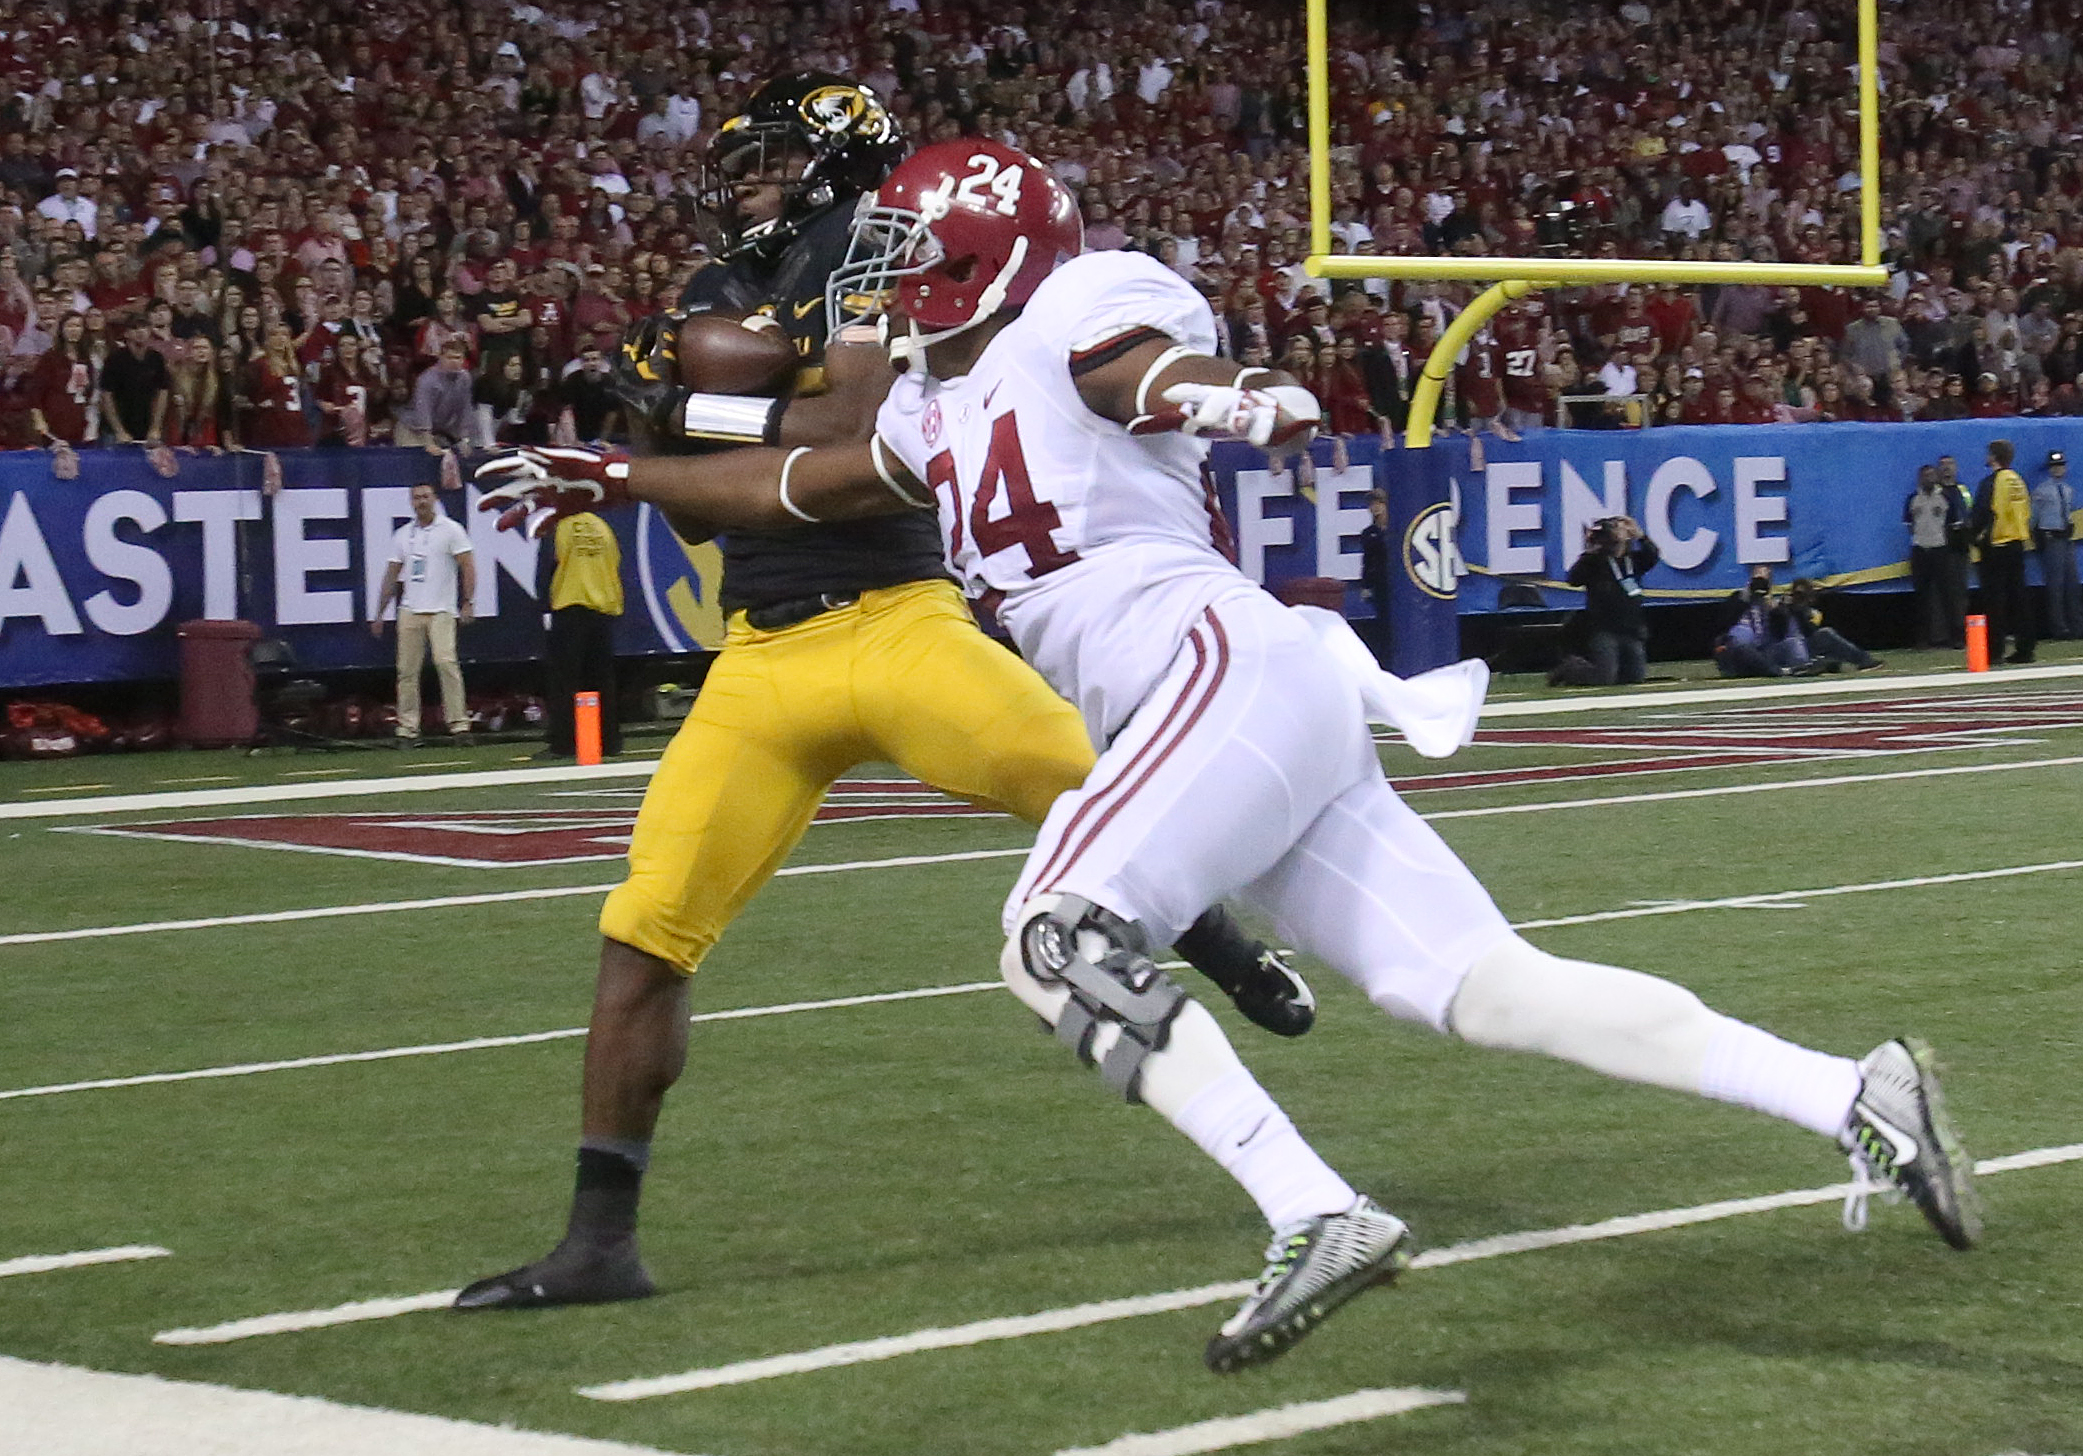 Dec 6, 2014; Atlanta, GA, USA; Missouri Tigers wide receiver Jimmie Hunt (88) catches a pass against Alabama Crimson Tide defensive back Geno Smith (24) in the third quarter of the 2014 SEC Championship at the Georgia Dome. (Jason Getz-USA TODAY Sports)